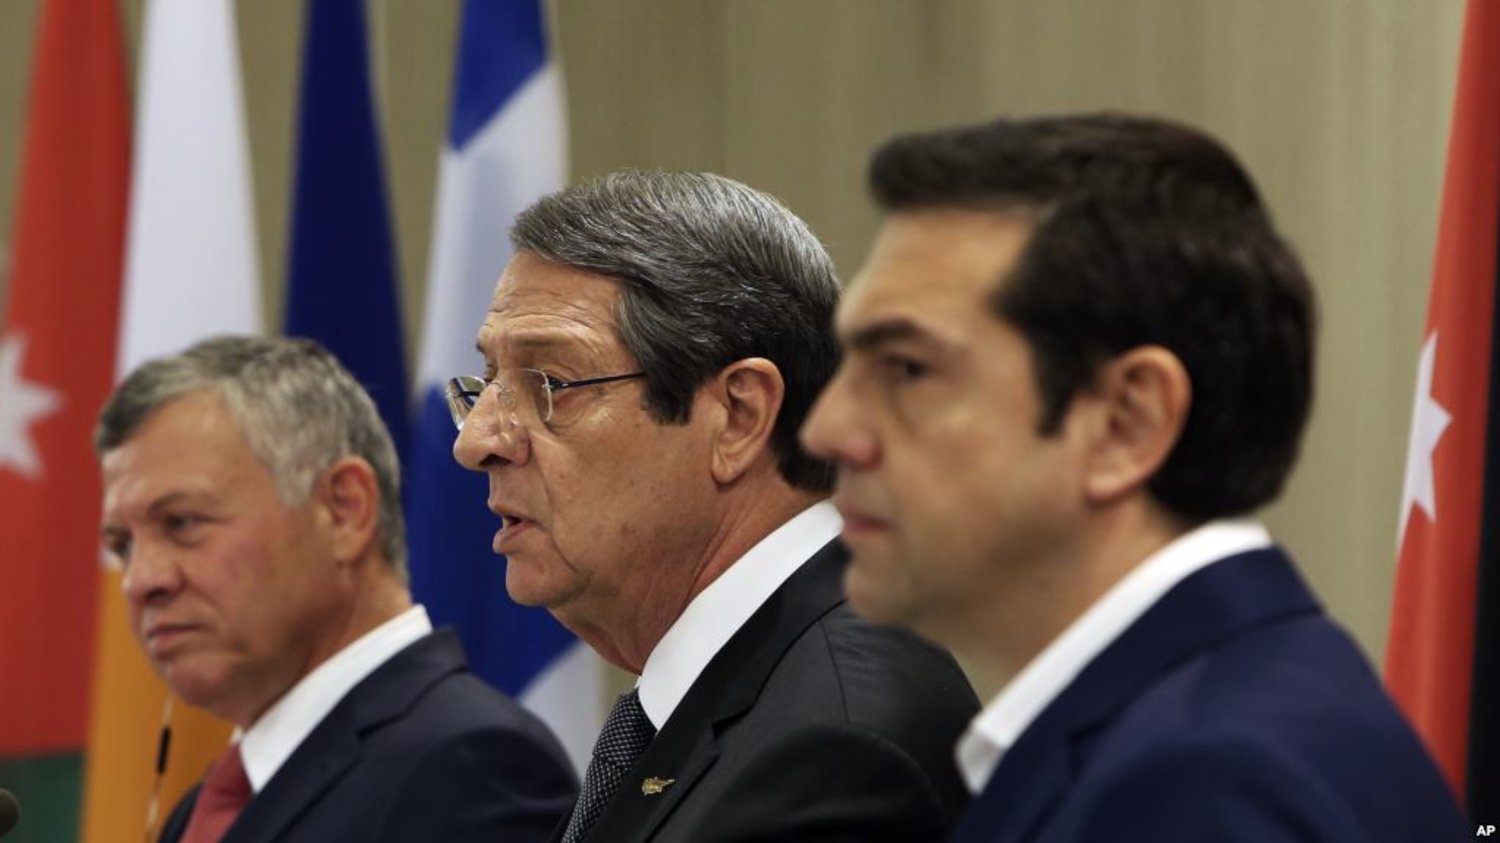 Cyprus President Nicos Anastasiades, center, talks to the media as Jordan's King Abdullah II, left, and Greek Prime Minister Alexis Tsipras listen during a press conference at the Presidential palace in capital Nicosia, Cyprus, on Tuesday. Jan. 16, 2018. (AP) 